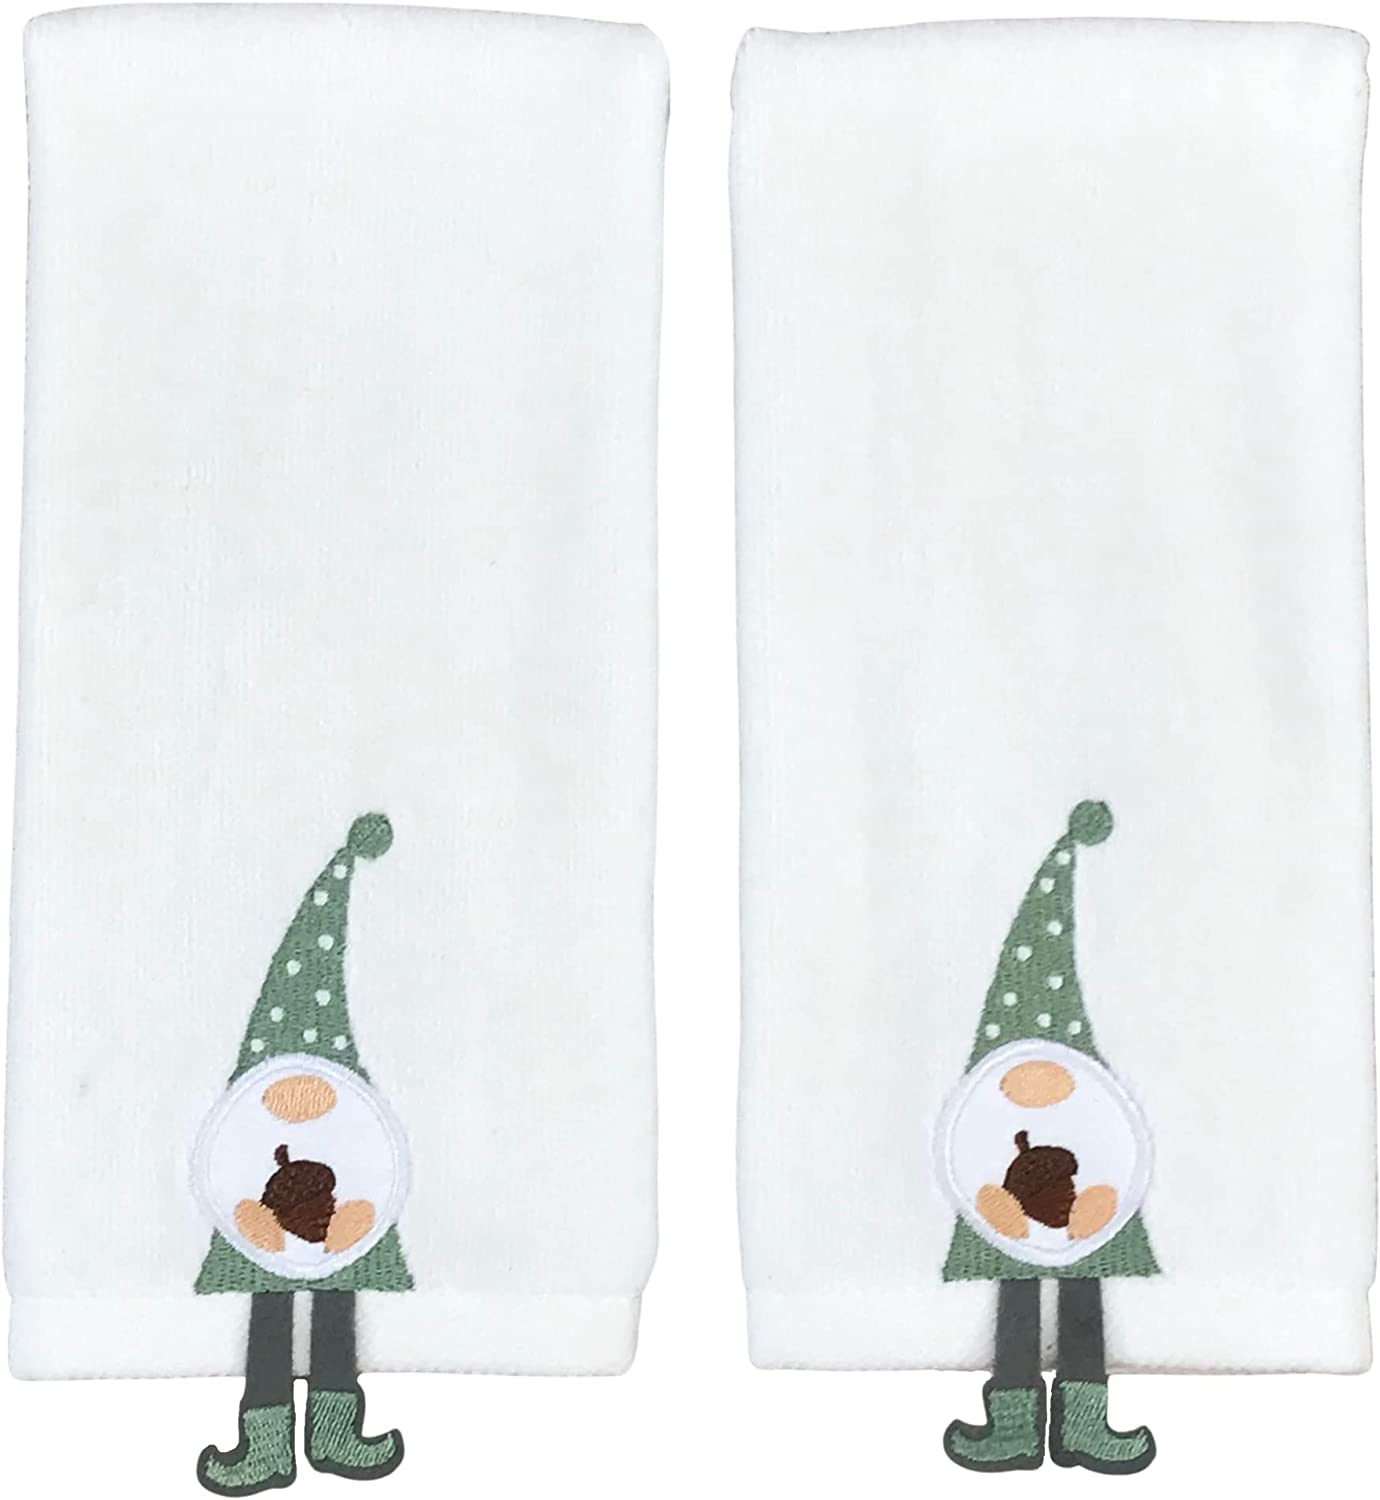 Serafina Home Decorative Fall Gnome Fingertip Towels: Embroidered Autumn Garden Gnome with Acorn Design with Fringe Dangle Feet on Plush Cream White, 2 Piece Set, 11" x 18" Inch - image 1 of 3